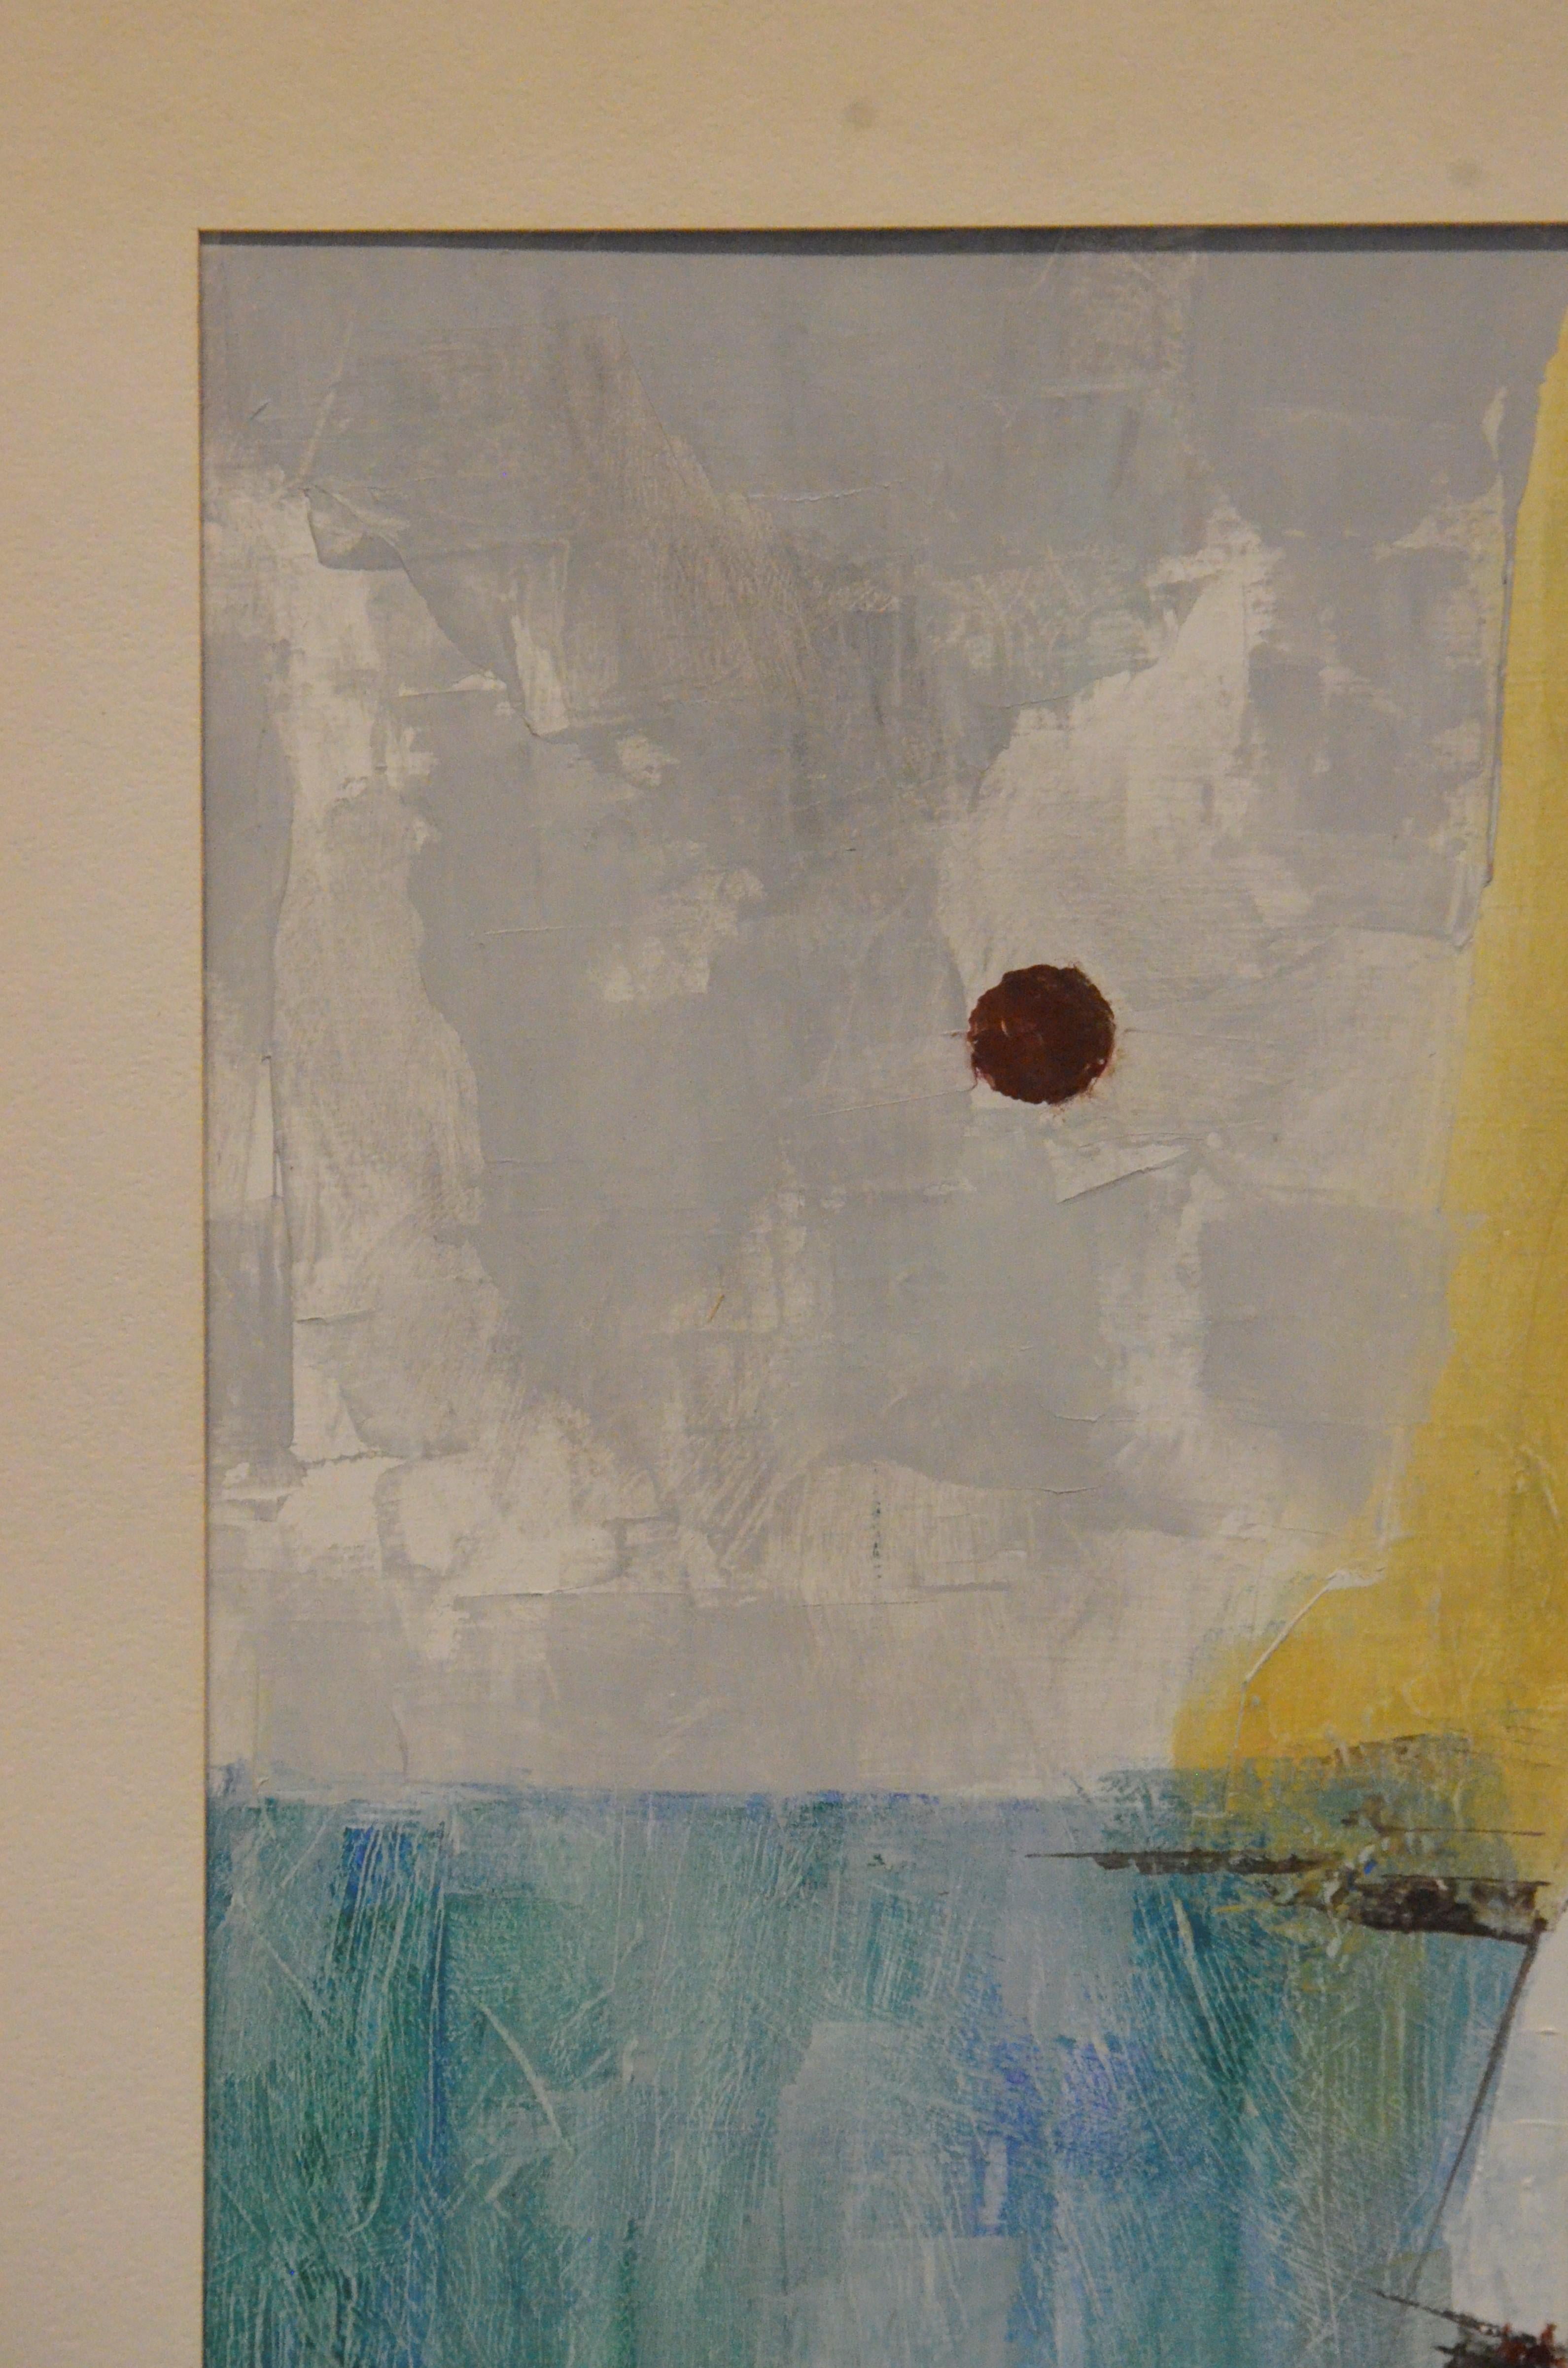 Offered is a signed 20th century mixed-media painting on paper of a seascape by Pat Bowers (born 1937) in greens, blues, yellows and black. The piece is more or less an abstract depiction of a seascape, moon or sun and a sail boat. Bowers has used